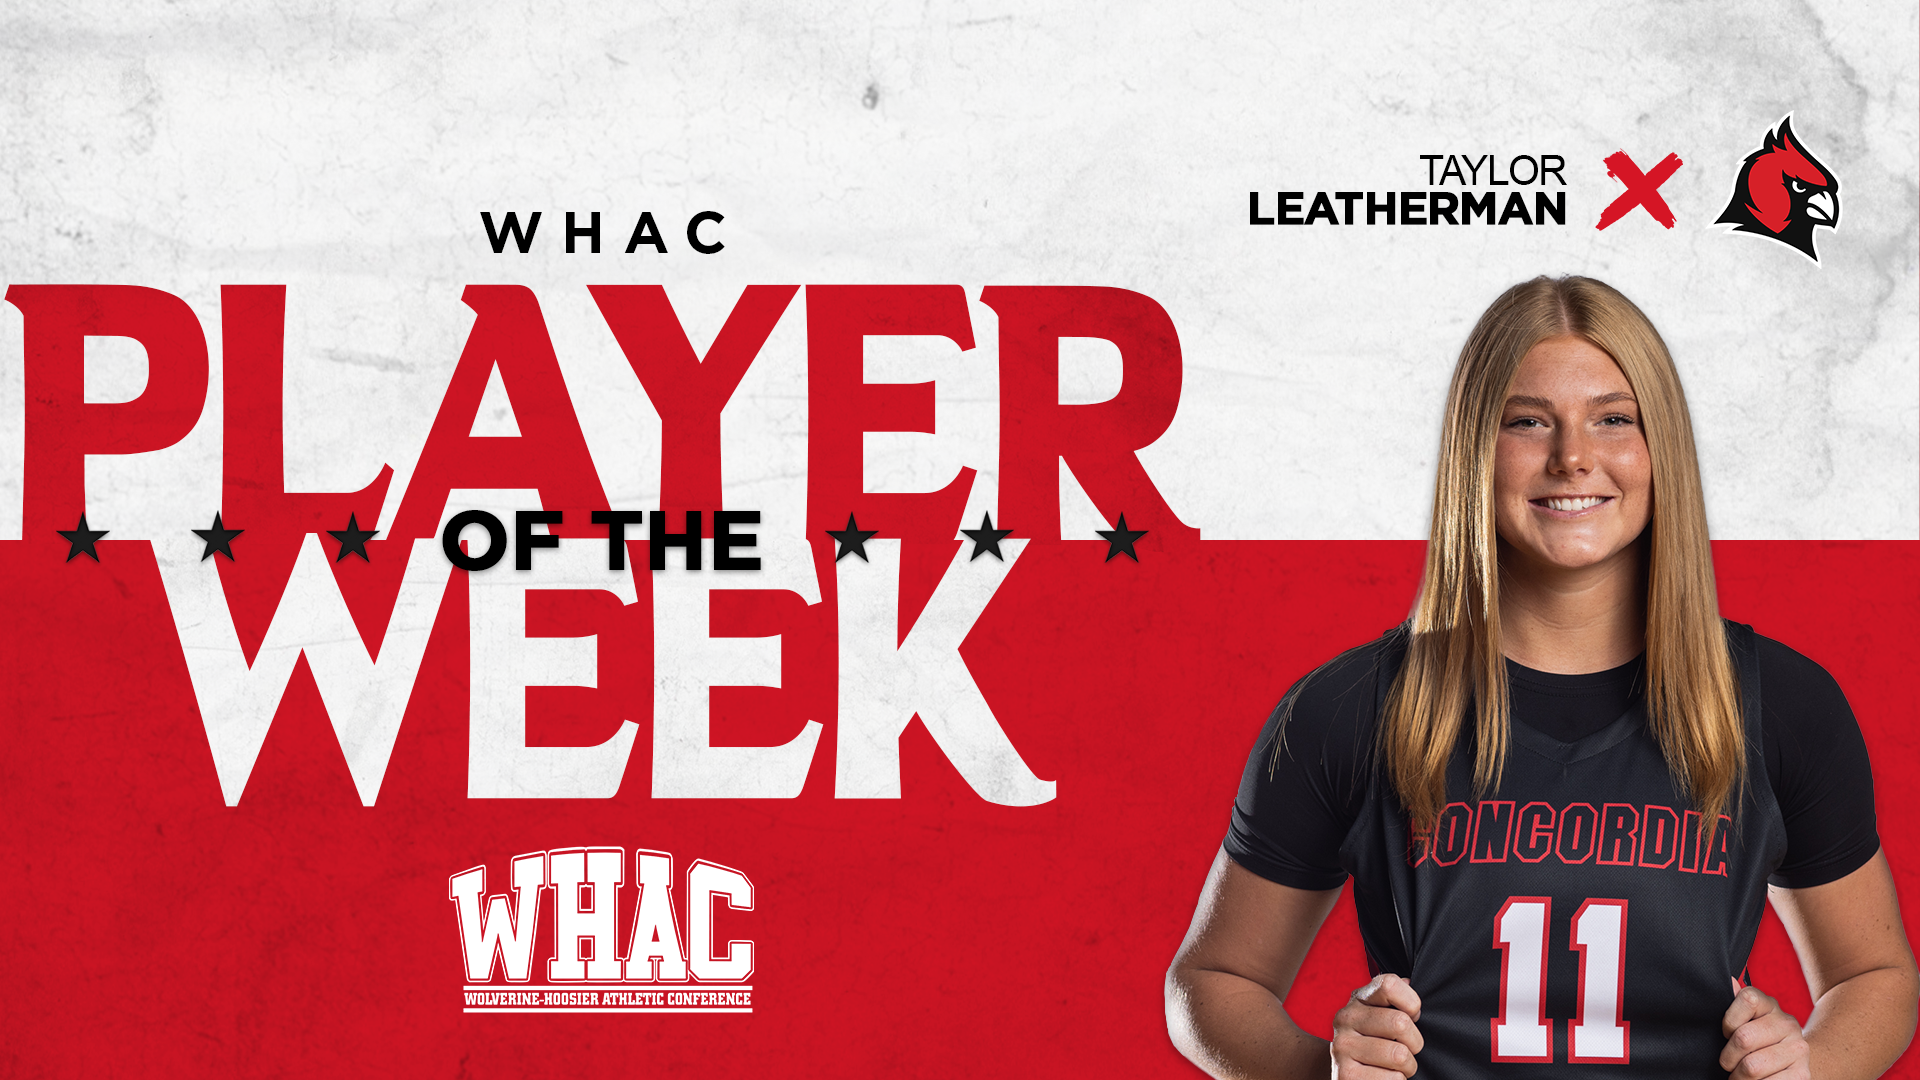 Leatherman takes home First WHAC Player of the Week honors